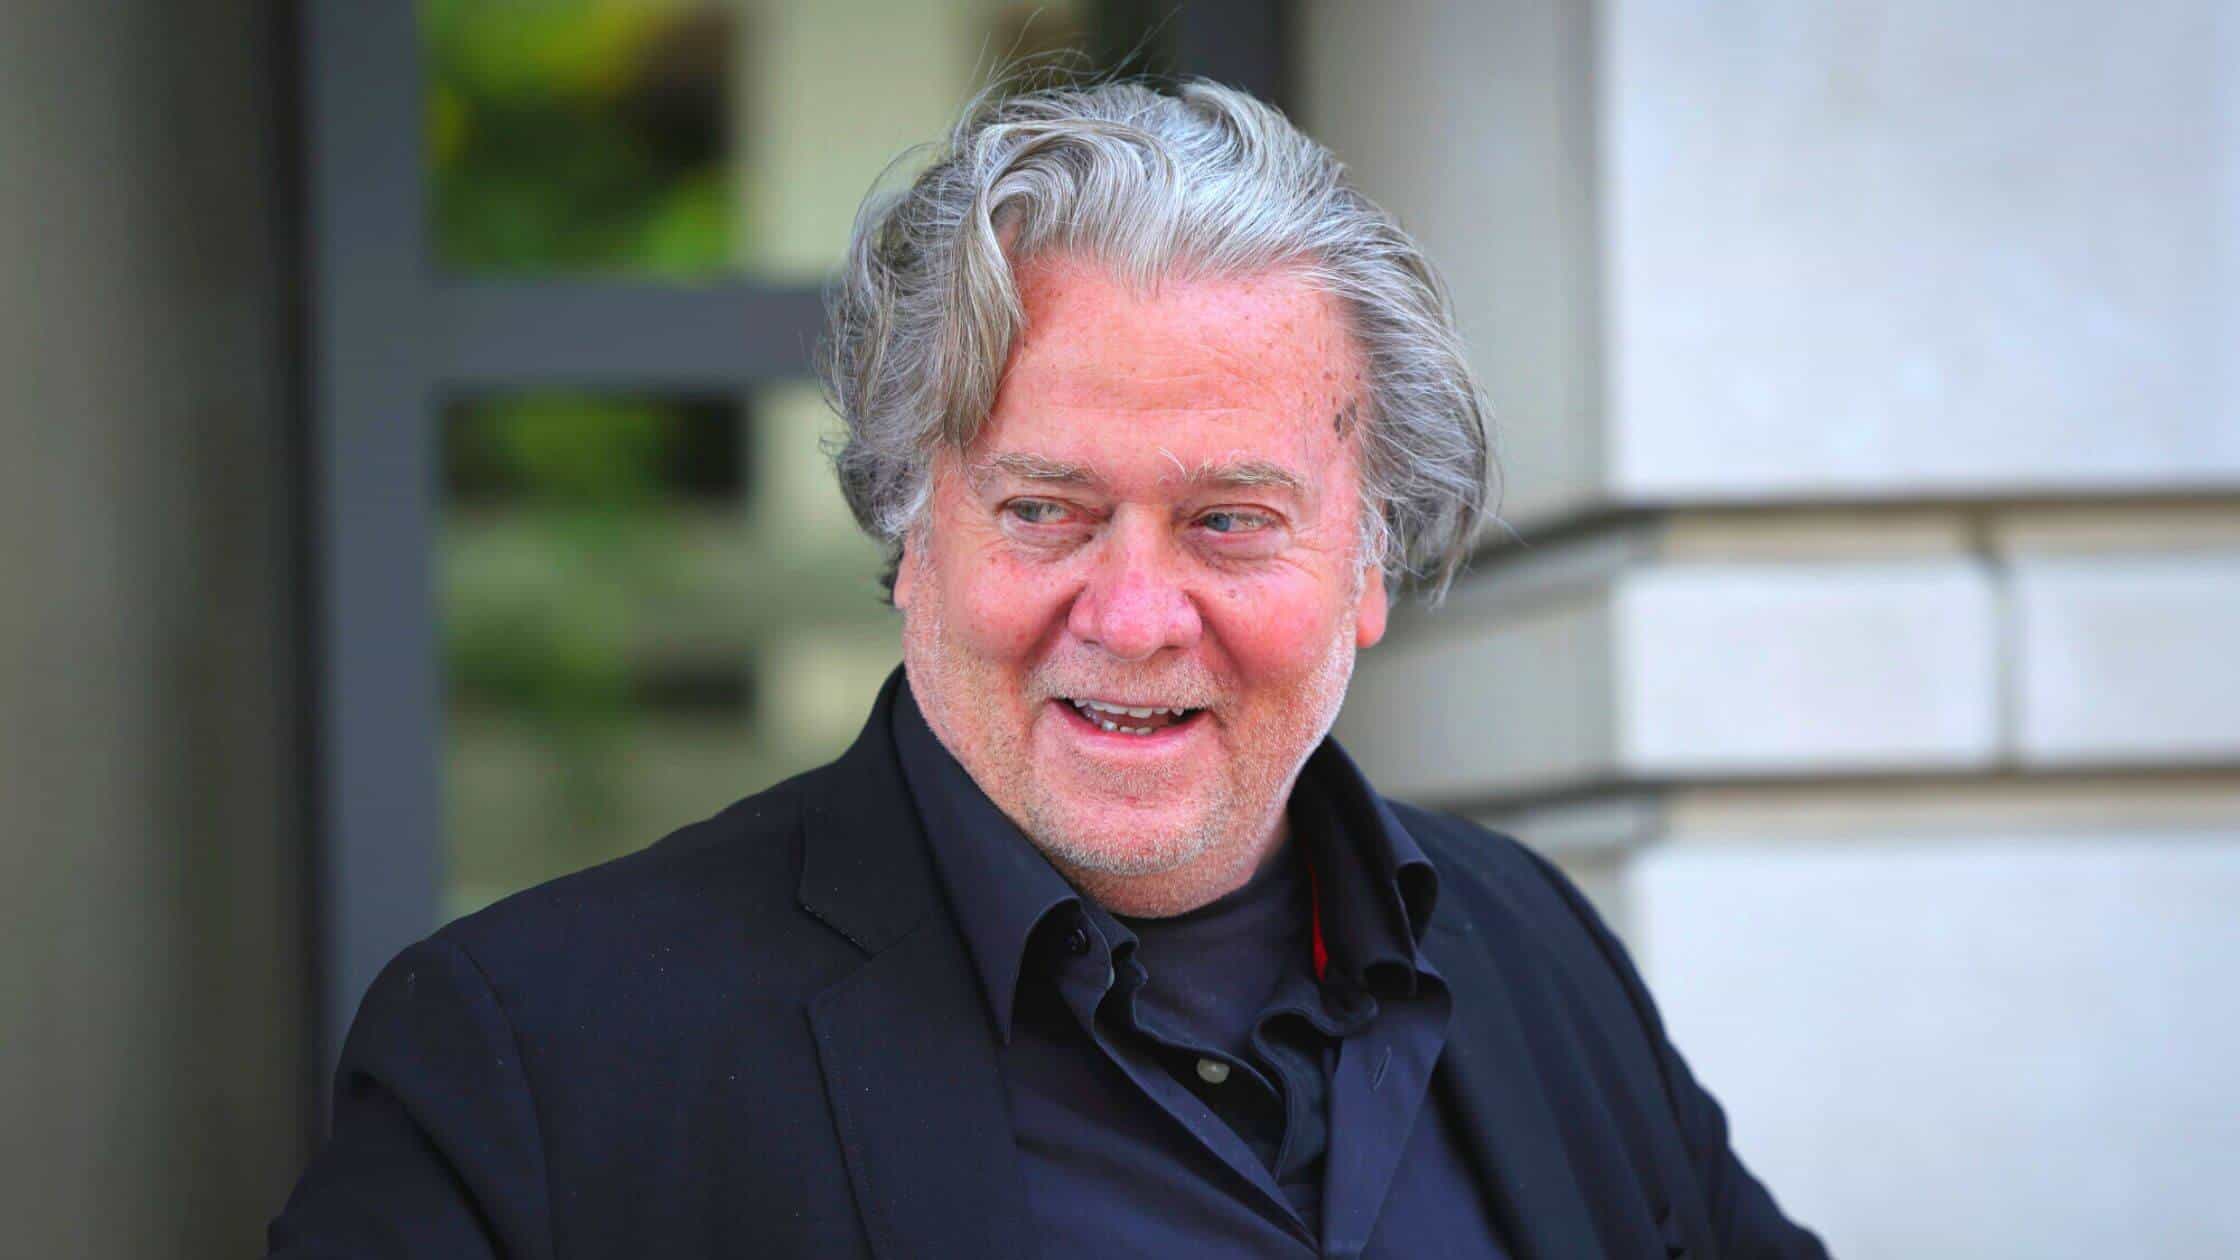 Steve Bannon Consents To Provide Testimony To The Committee